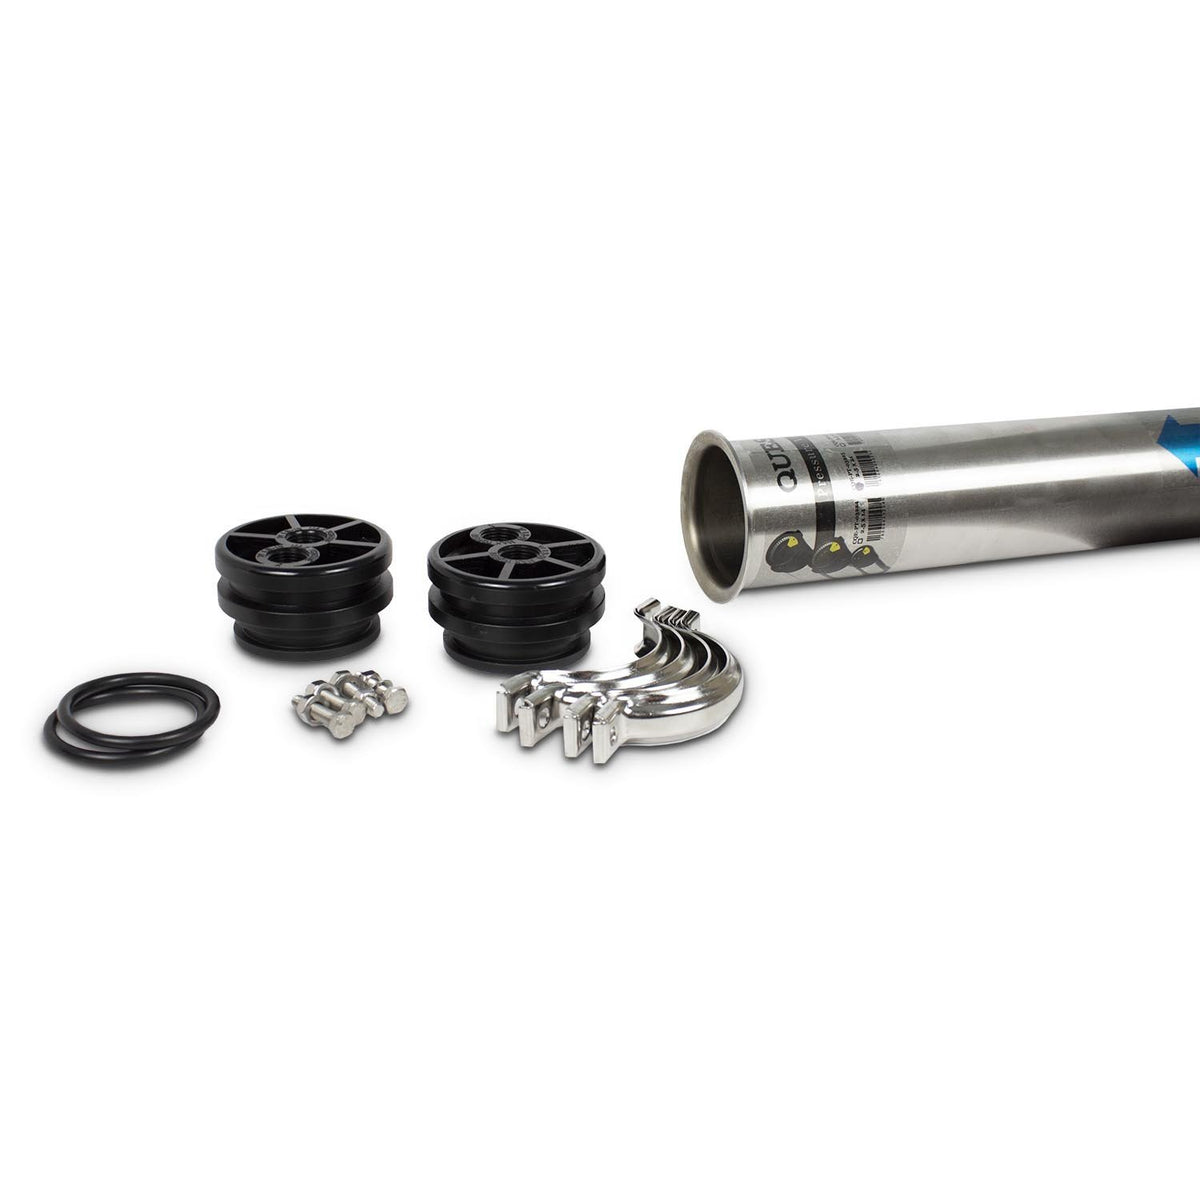 2.5" x 21" RO Membrane Housing with Cap,O-rings and Lock included - Parts - Crystal Quest Water Filters